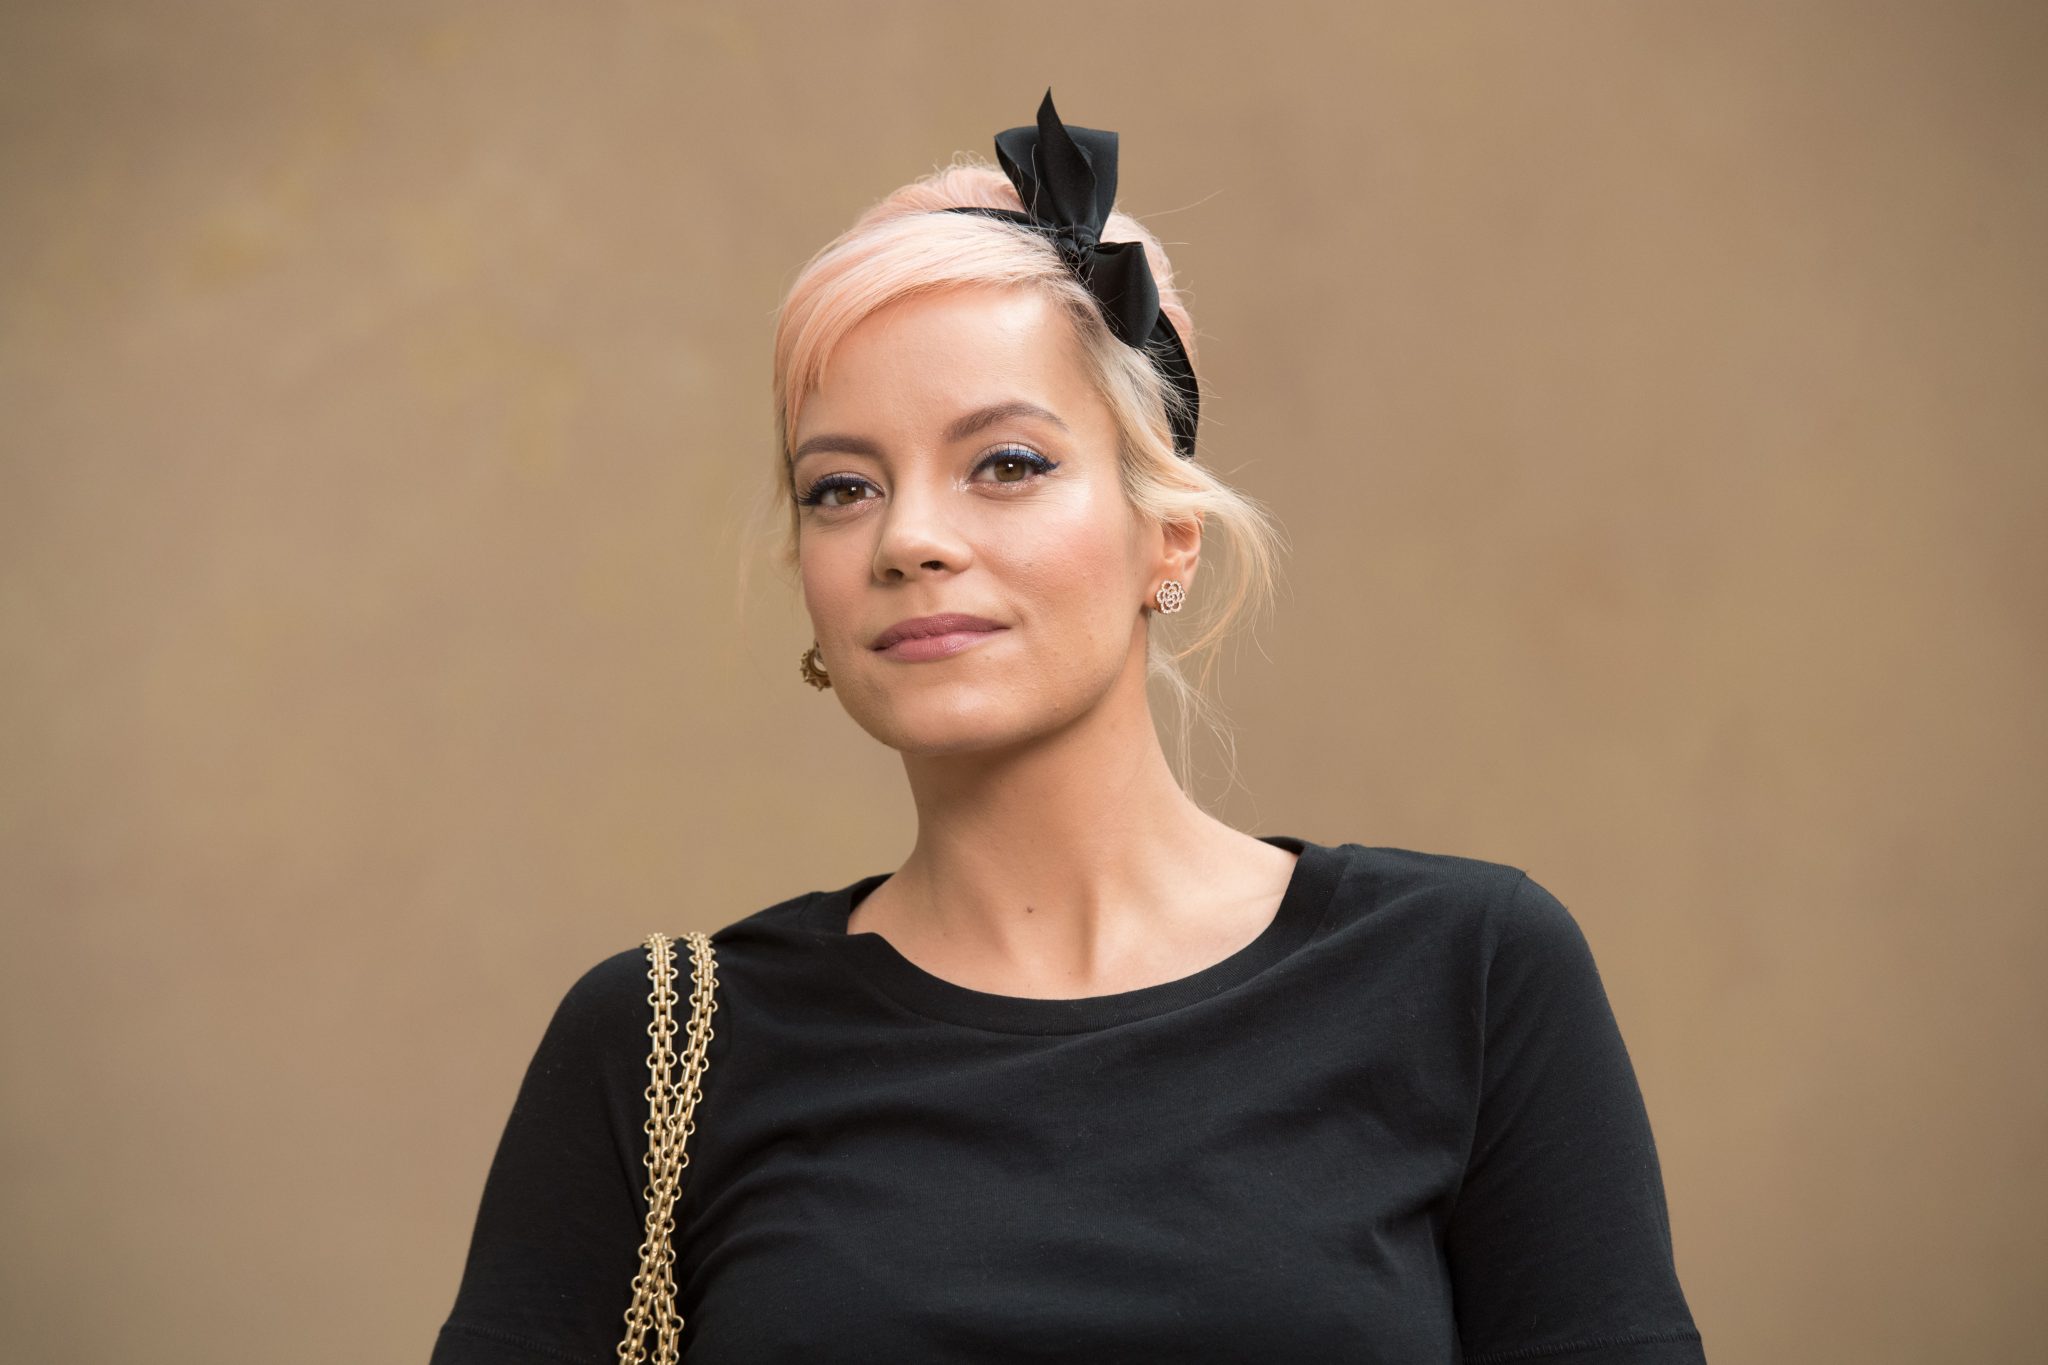 Lily Allen opens up about her own terrifying sexual harassment ordeal